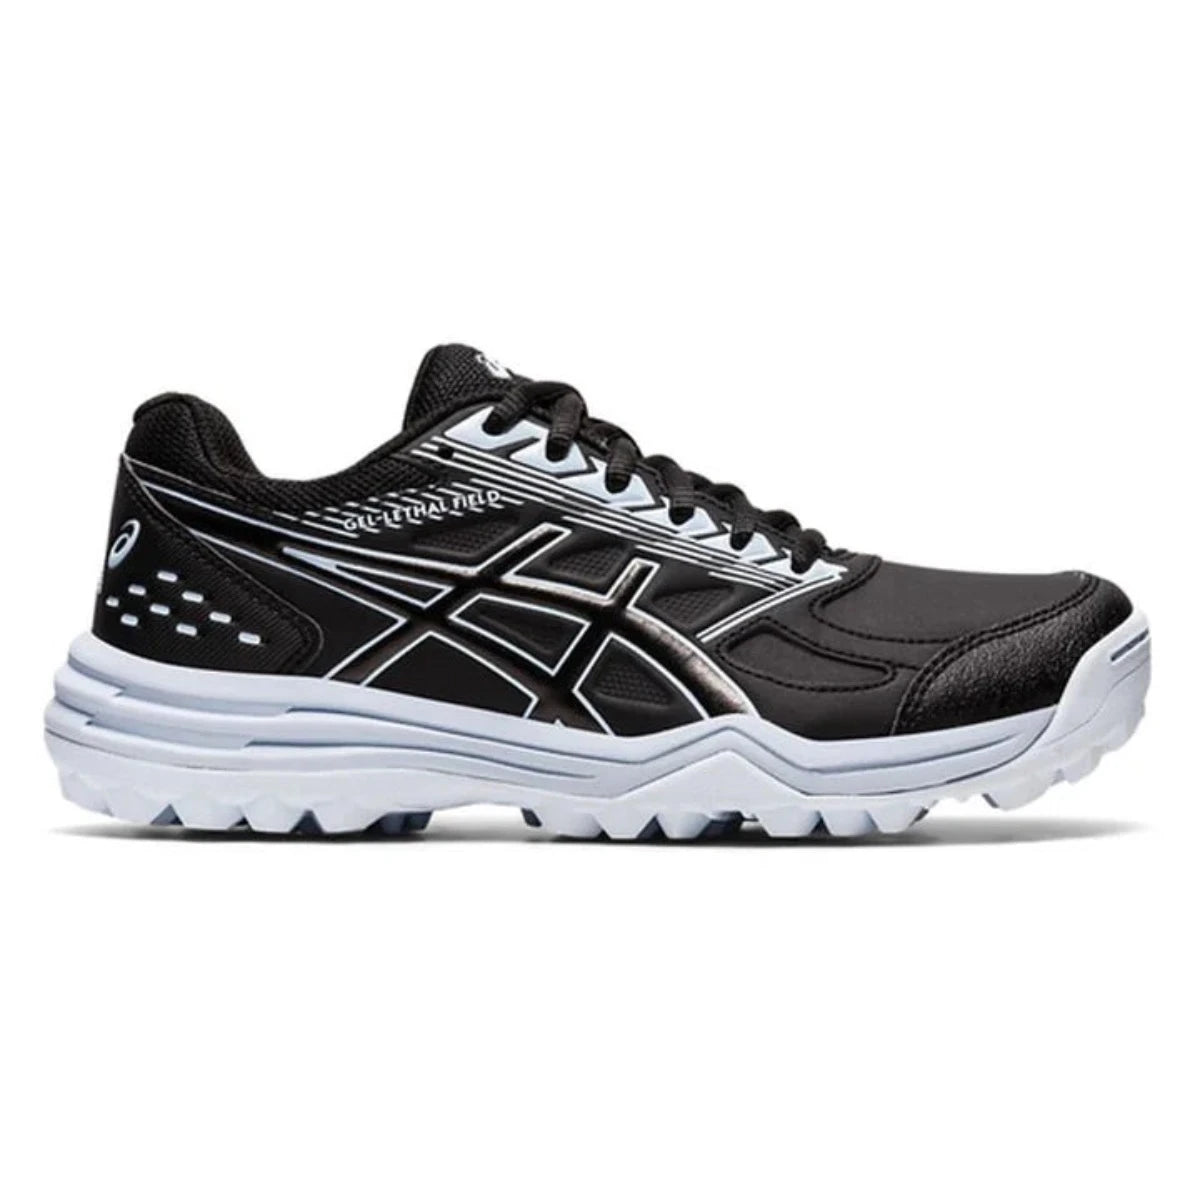 Asics Gel-Lethal Field Hockey Shoes Black/Soft Sky | ONE Sports Warehouse